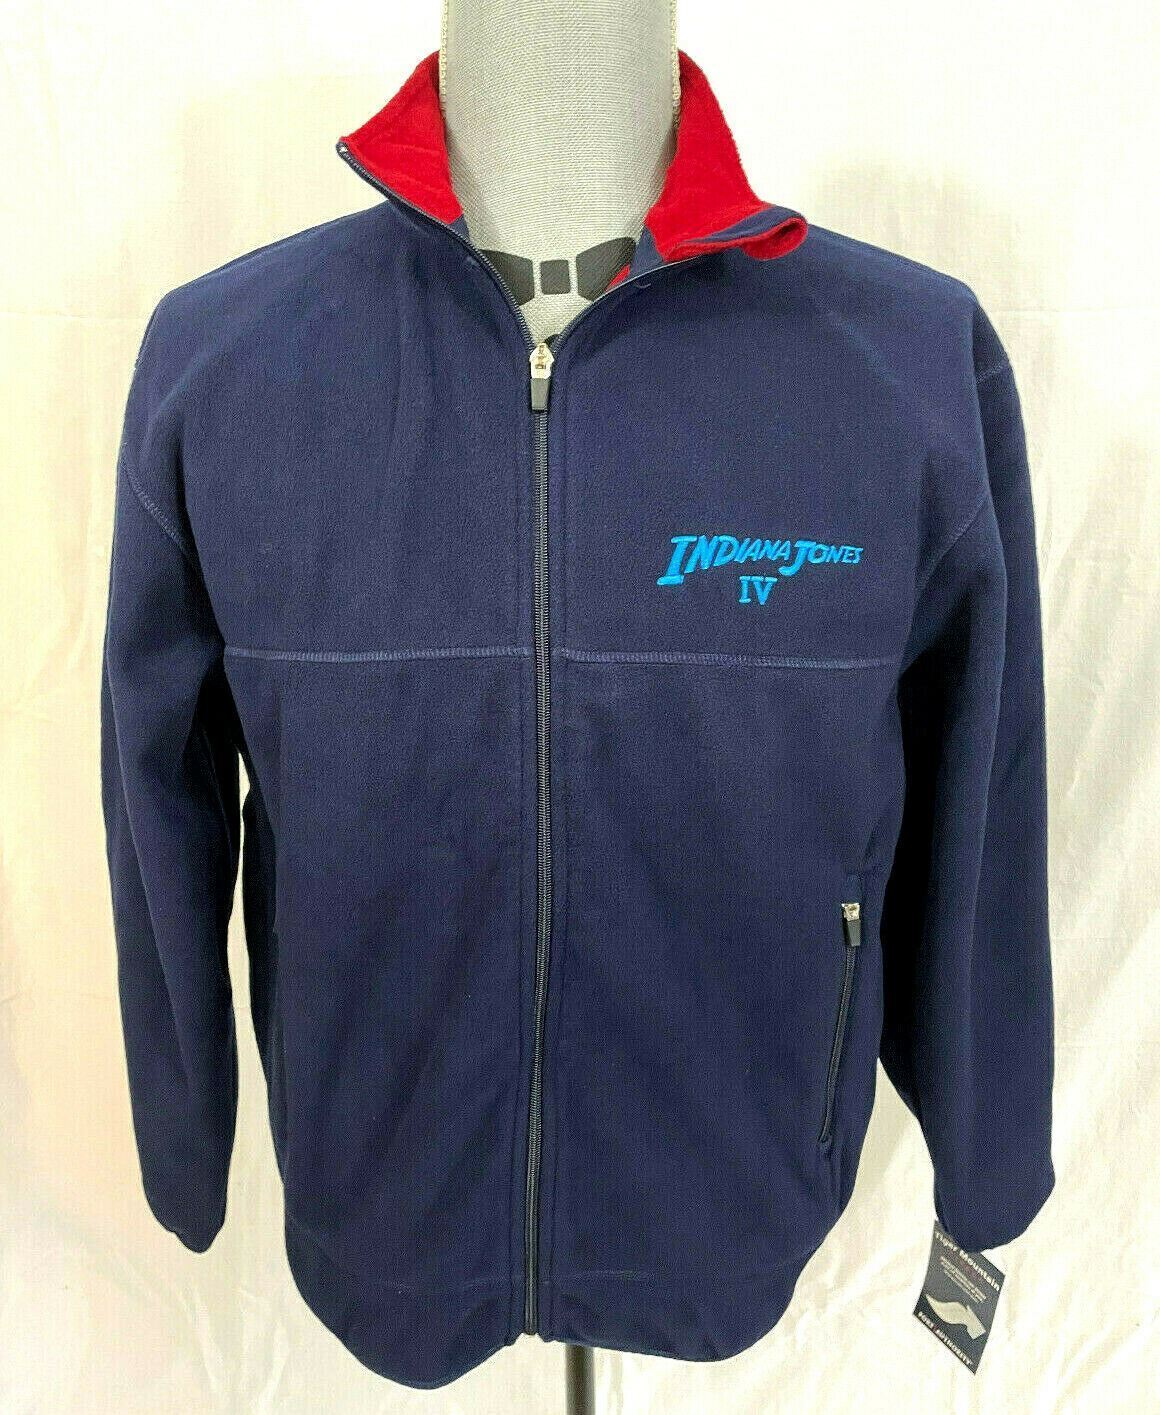 Indiana Jones IV (4) Possible Cast and Crew Only Fleece Jacket - Size M - RARE